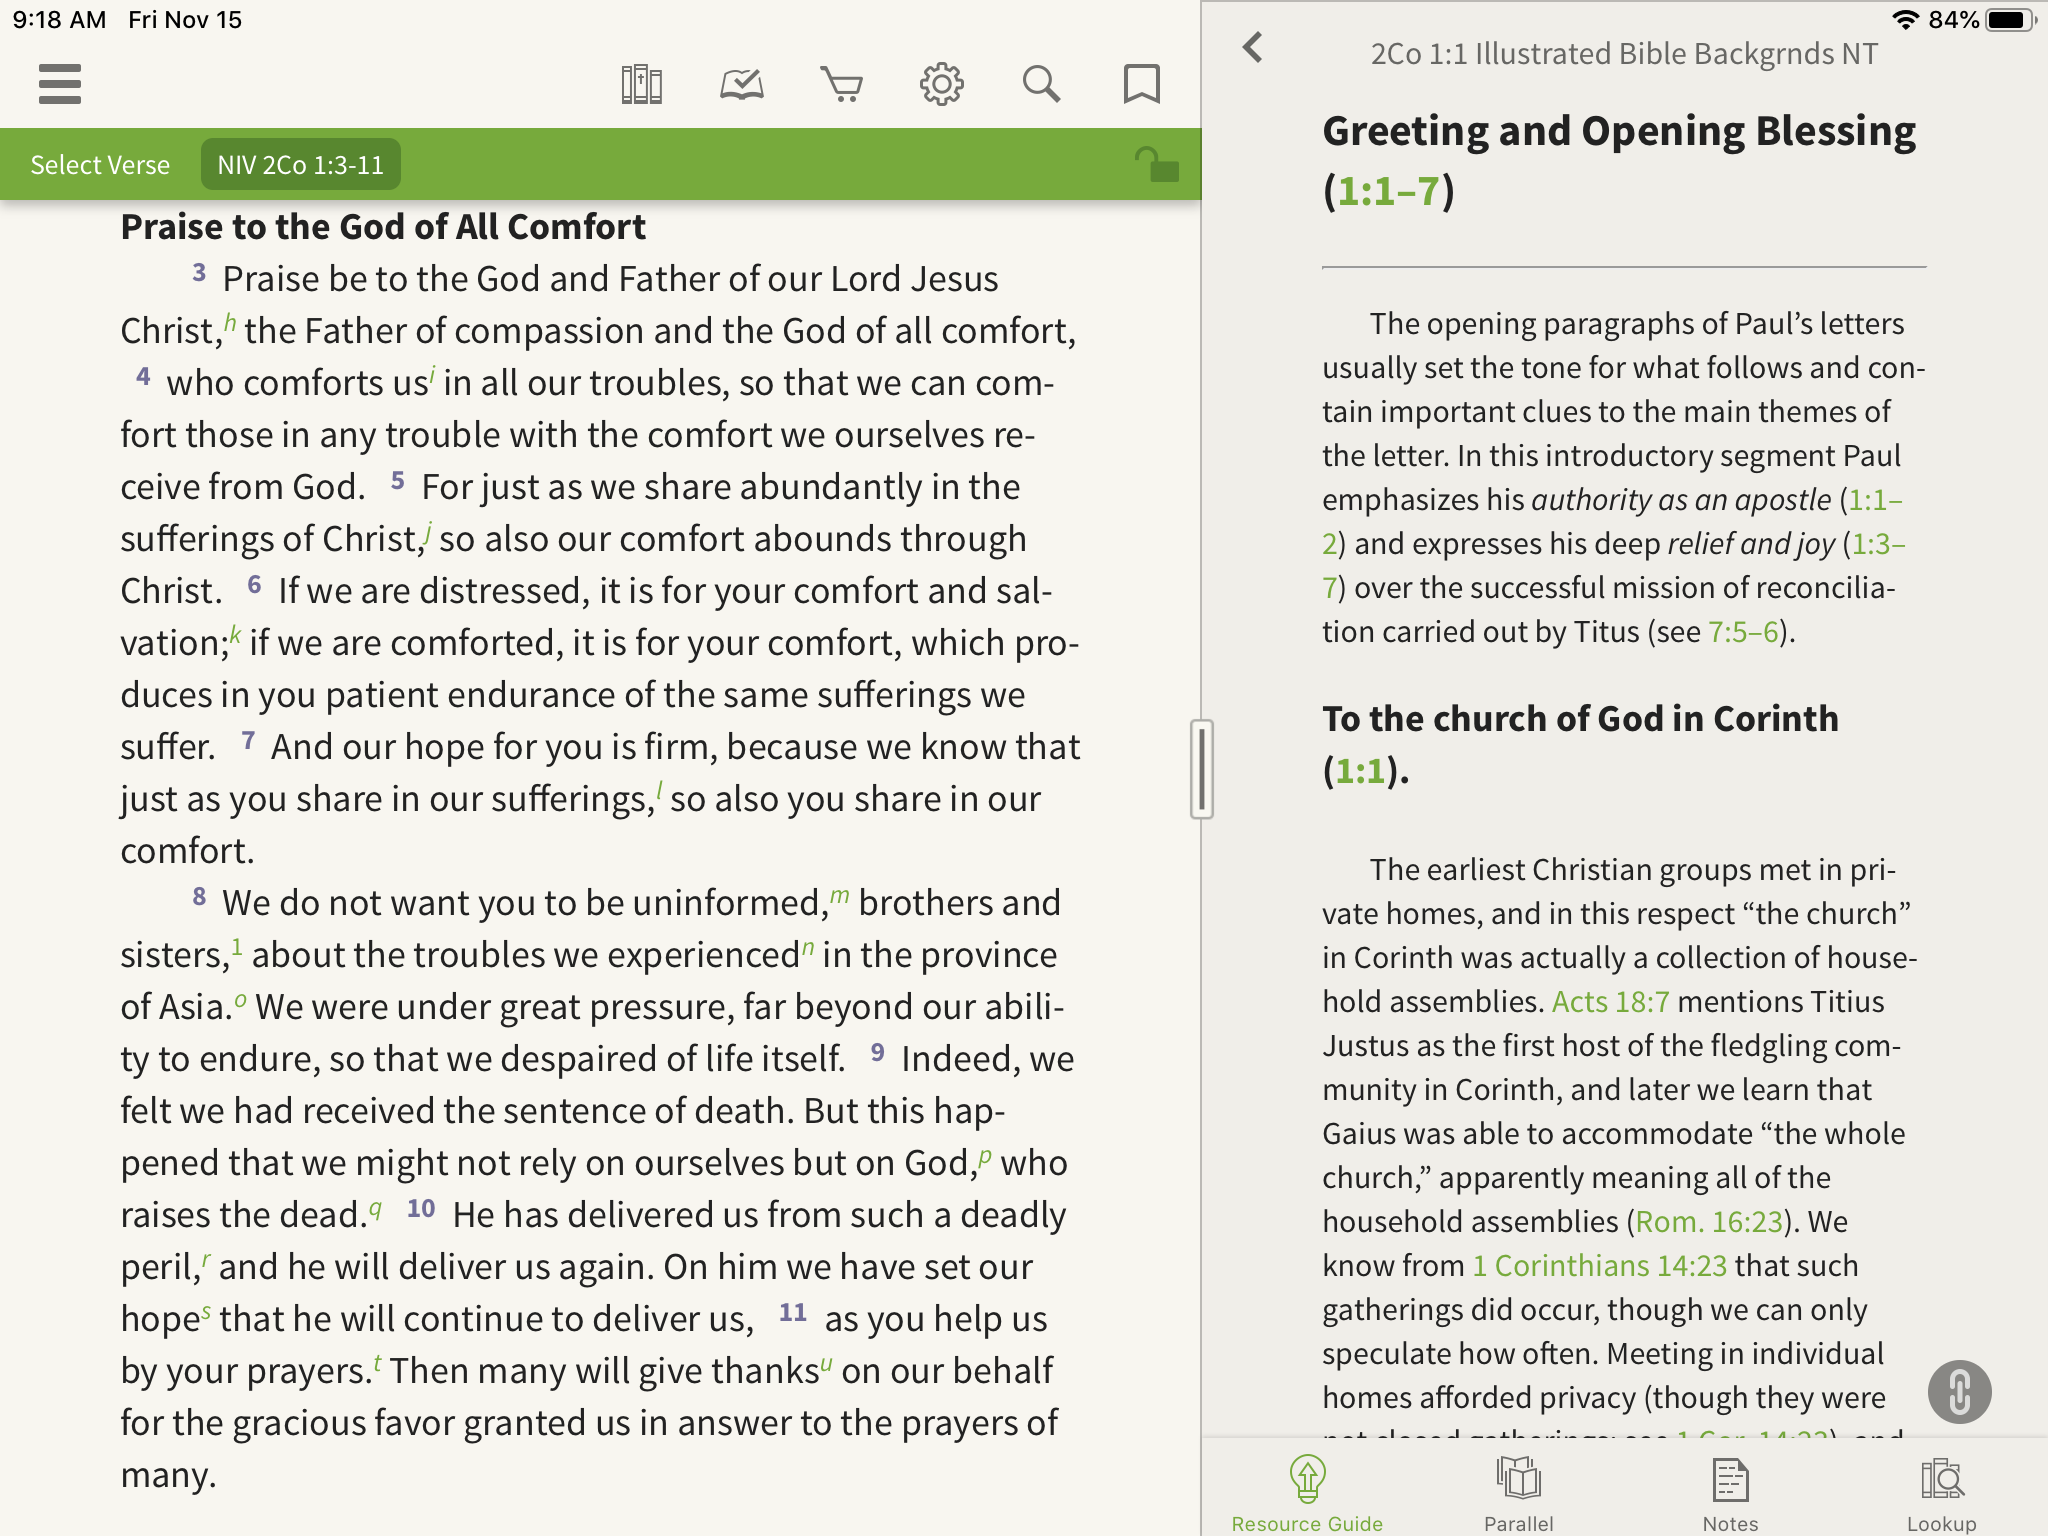 Olive Tree Bible App Commentary Features